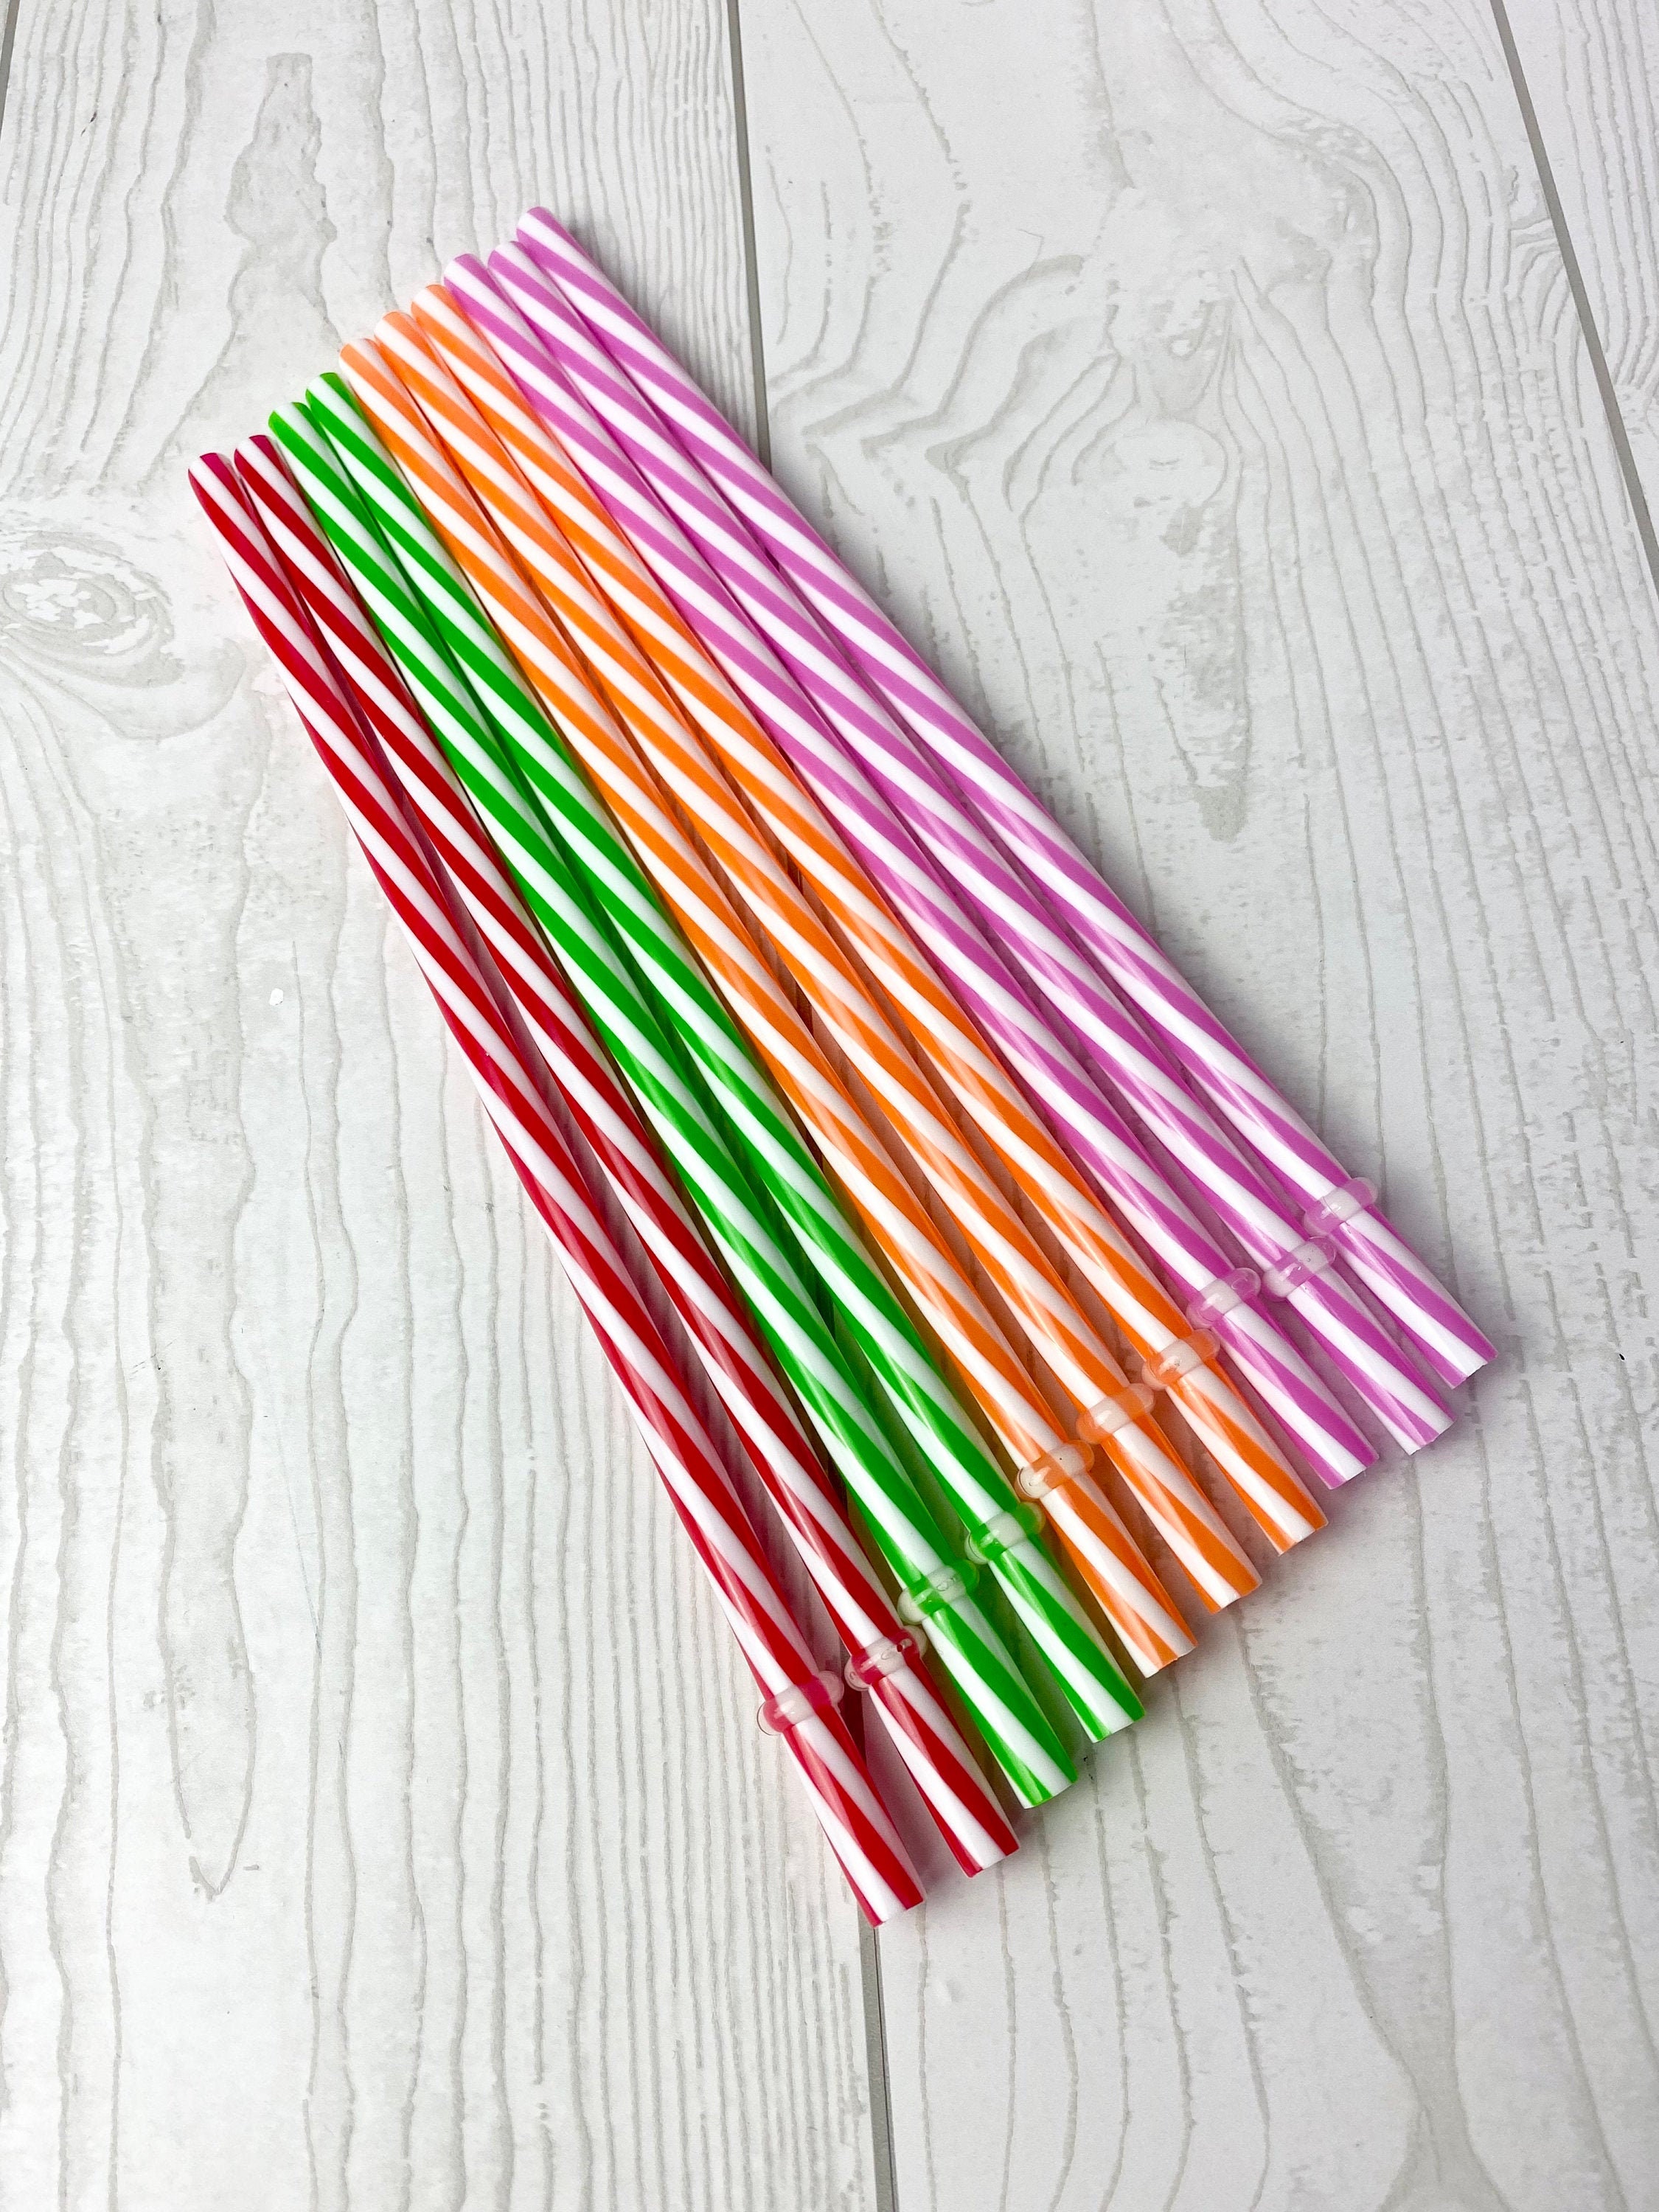 10 Reusable Silicone Drinking Straws - 8 Colors